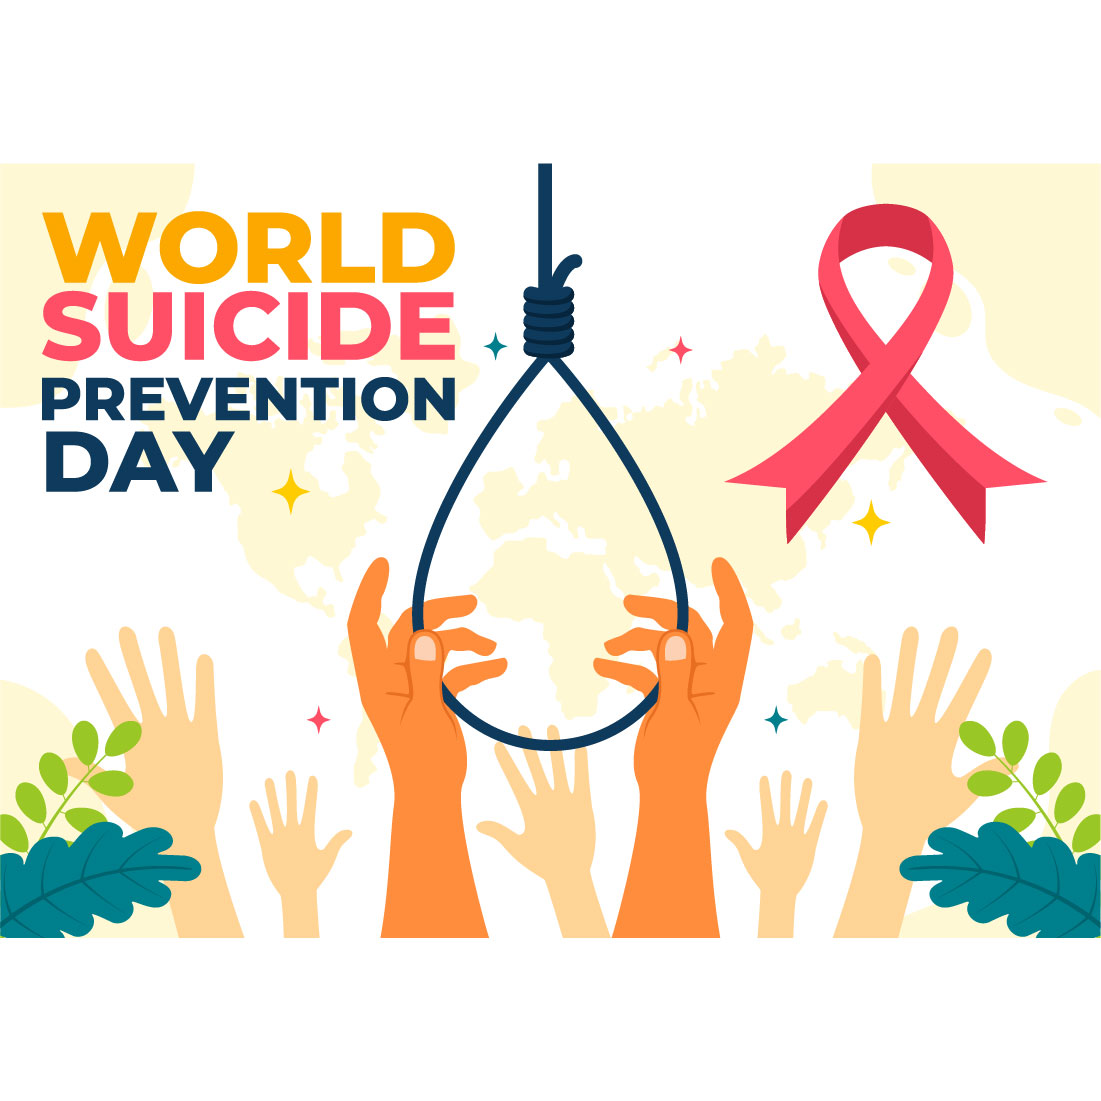 13 World Suicide Prevention Day Illustration cover image.